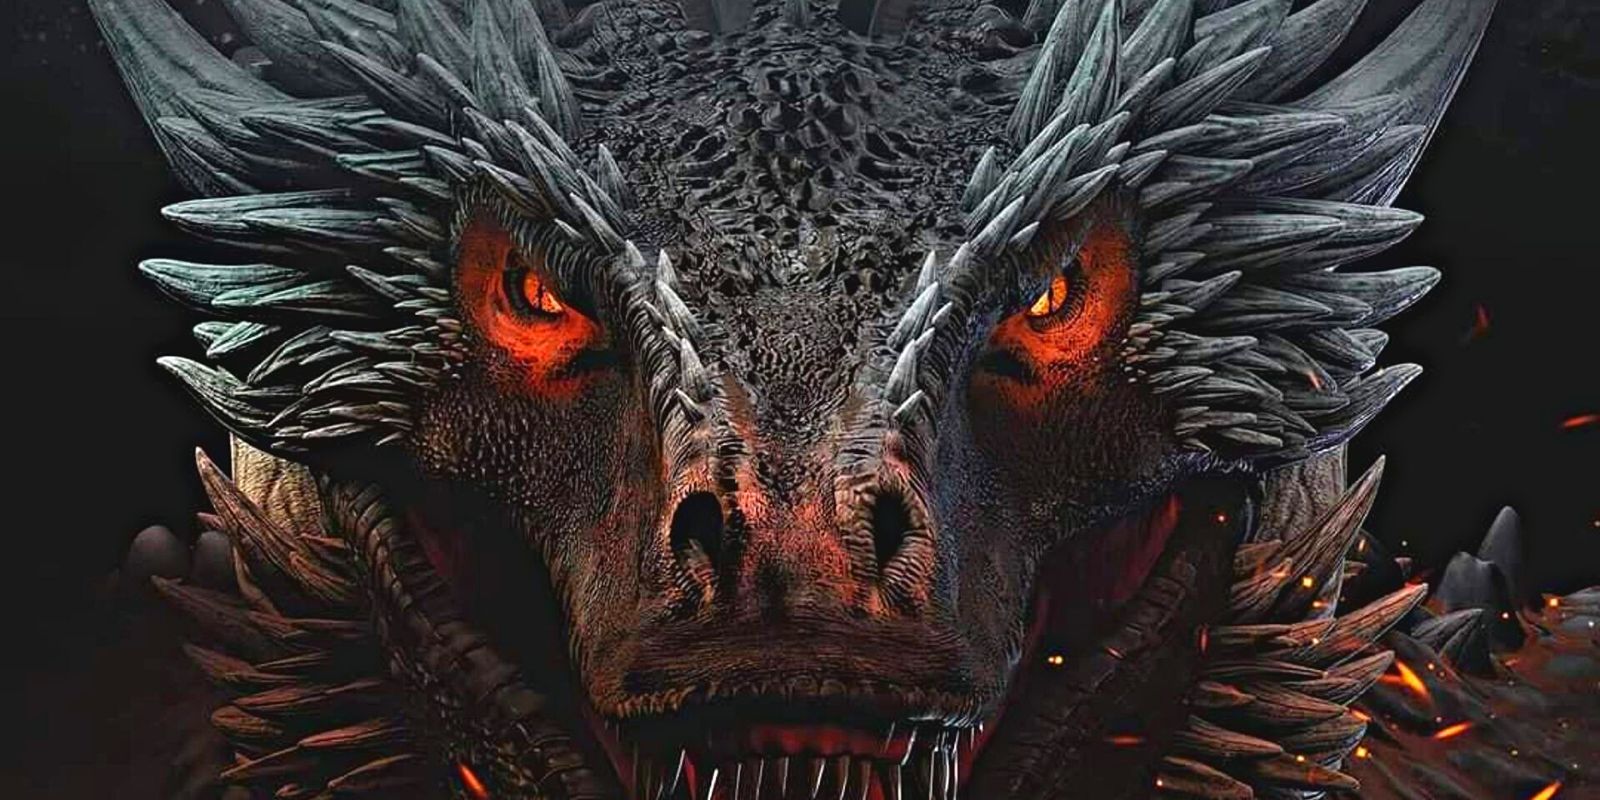 A black and grey dragon with glowing red eyes glaring at the reader